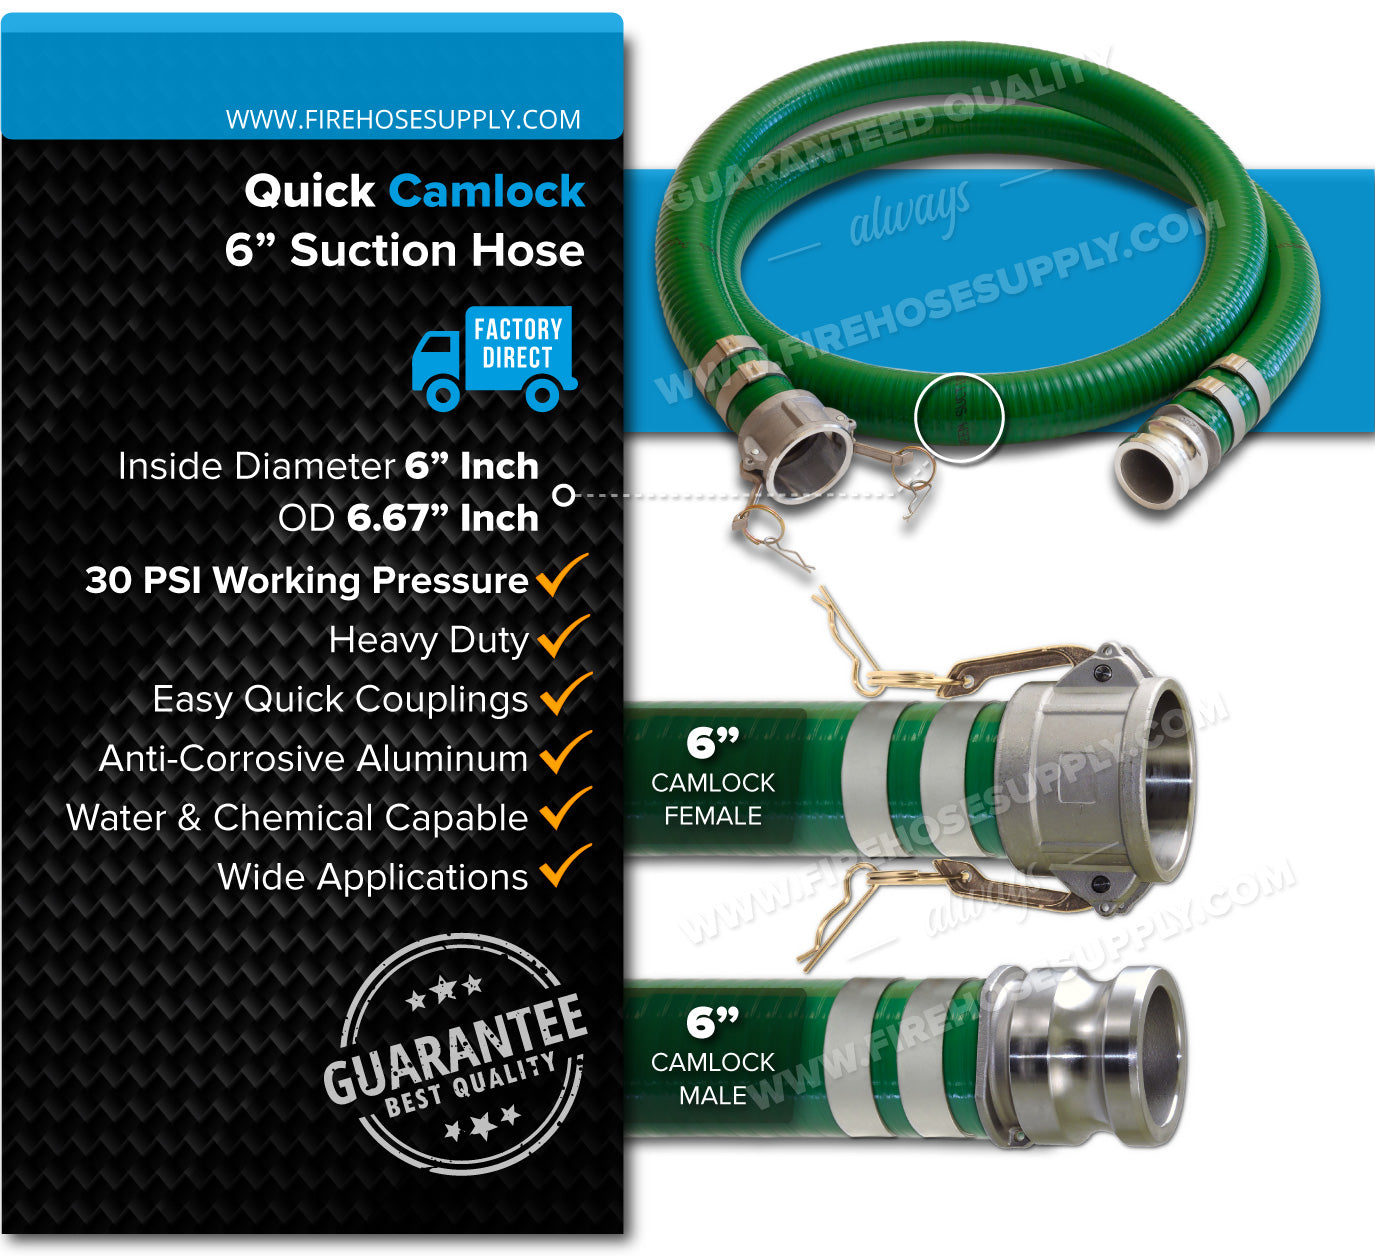 6 Inch Camlock Female x Male Green Suction Hose Overview